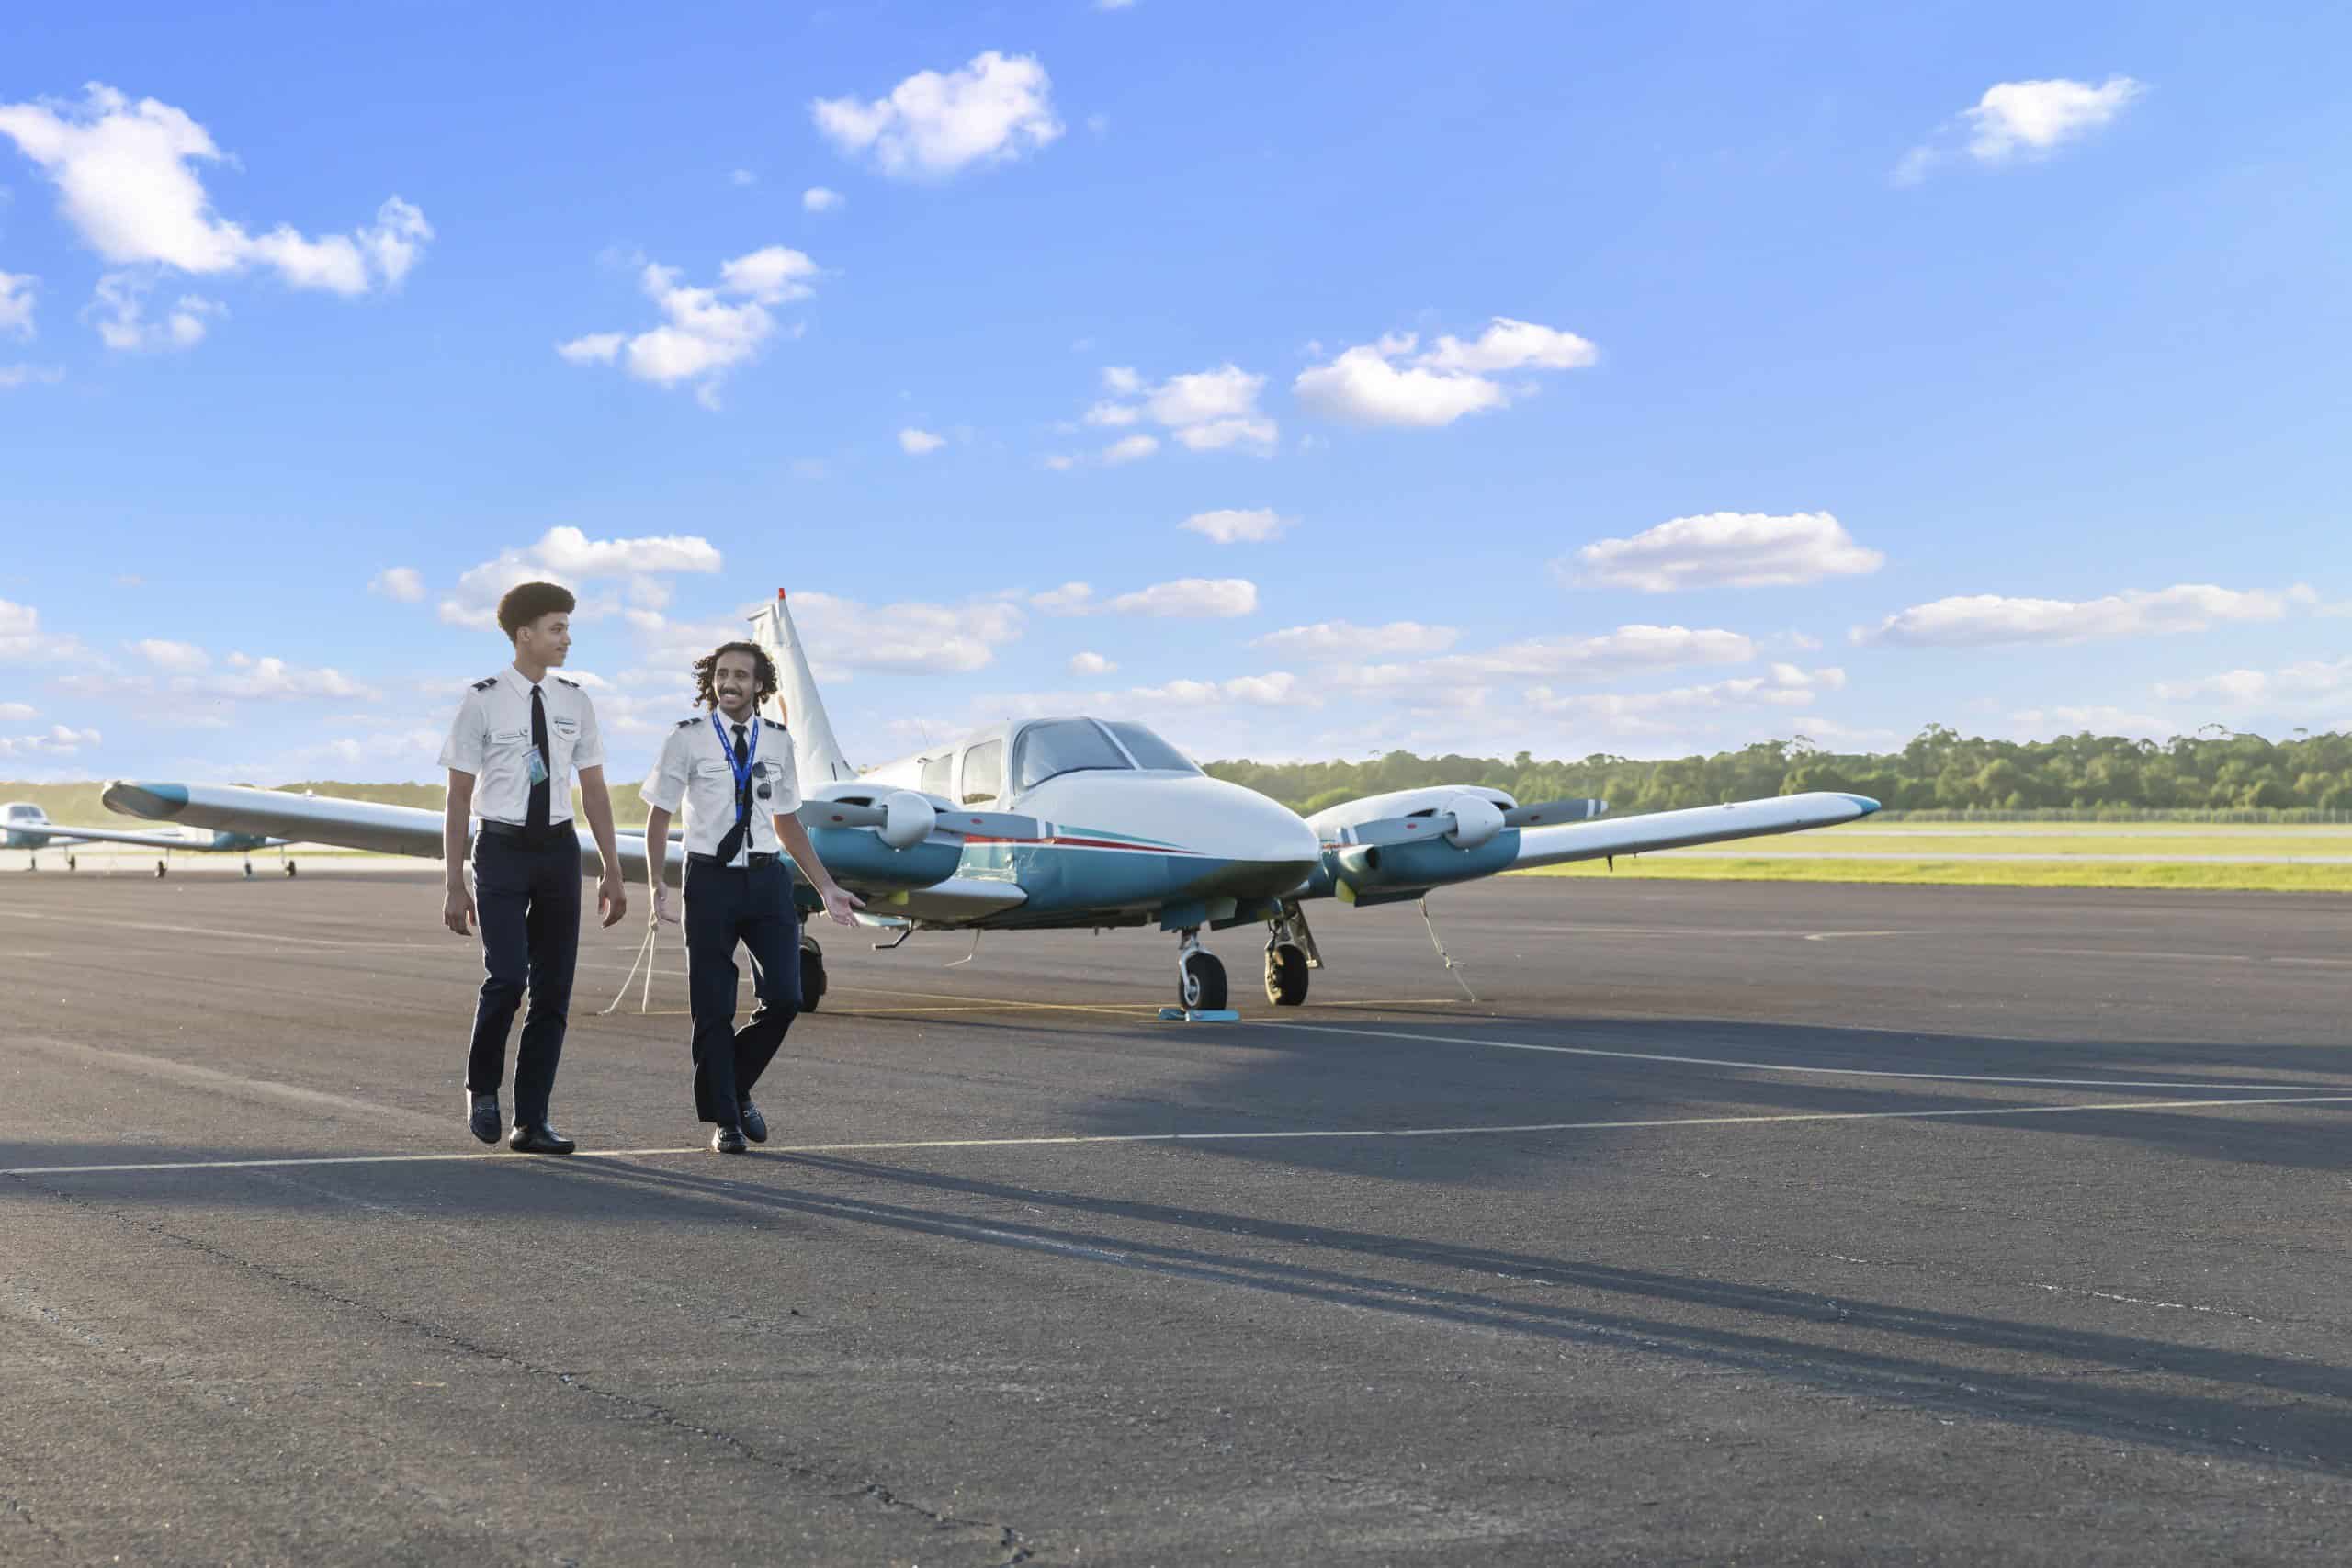 Two pilots walking on the tarmac with a Paris Air small airplane behind them